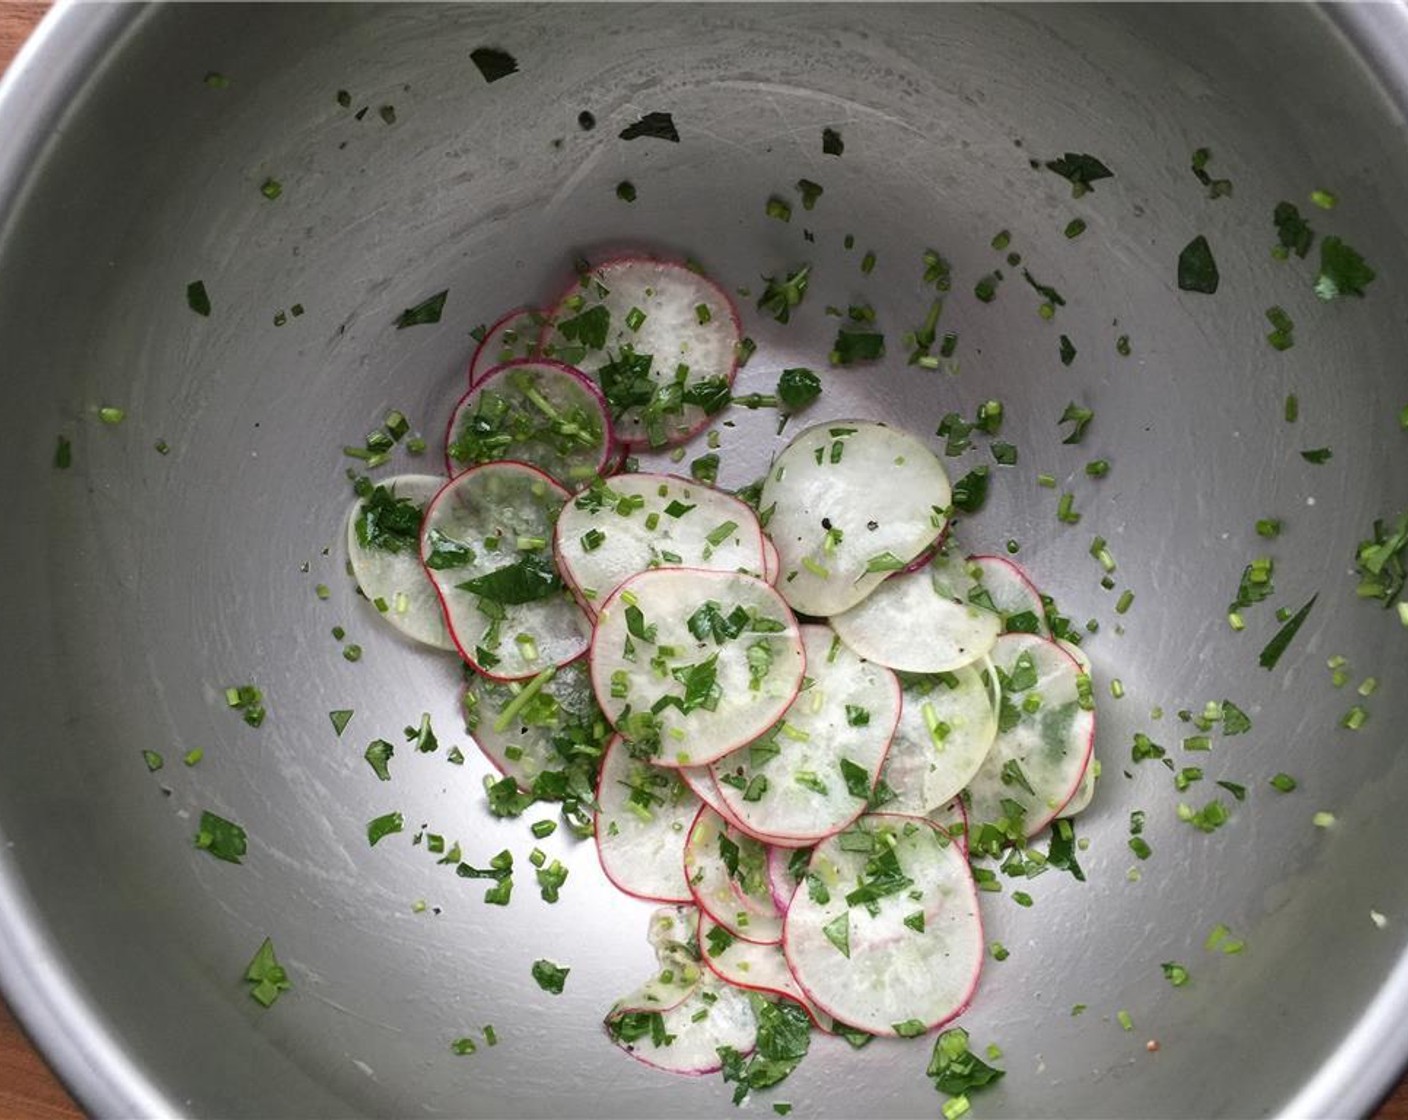 step 9 In a small bowl toss together the Radish (1 cup), Fresh Chives (1/4 cup), Italian Flat-Leaf Parsley (1/4 cup), Kosher Salt (to taste), Freshly Ground Black Pepper (to taste), juice from Lemon (1) and Extra-Virgin Olive Oil (1 Tbsp).